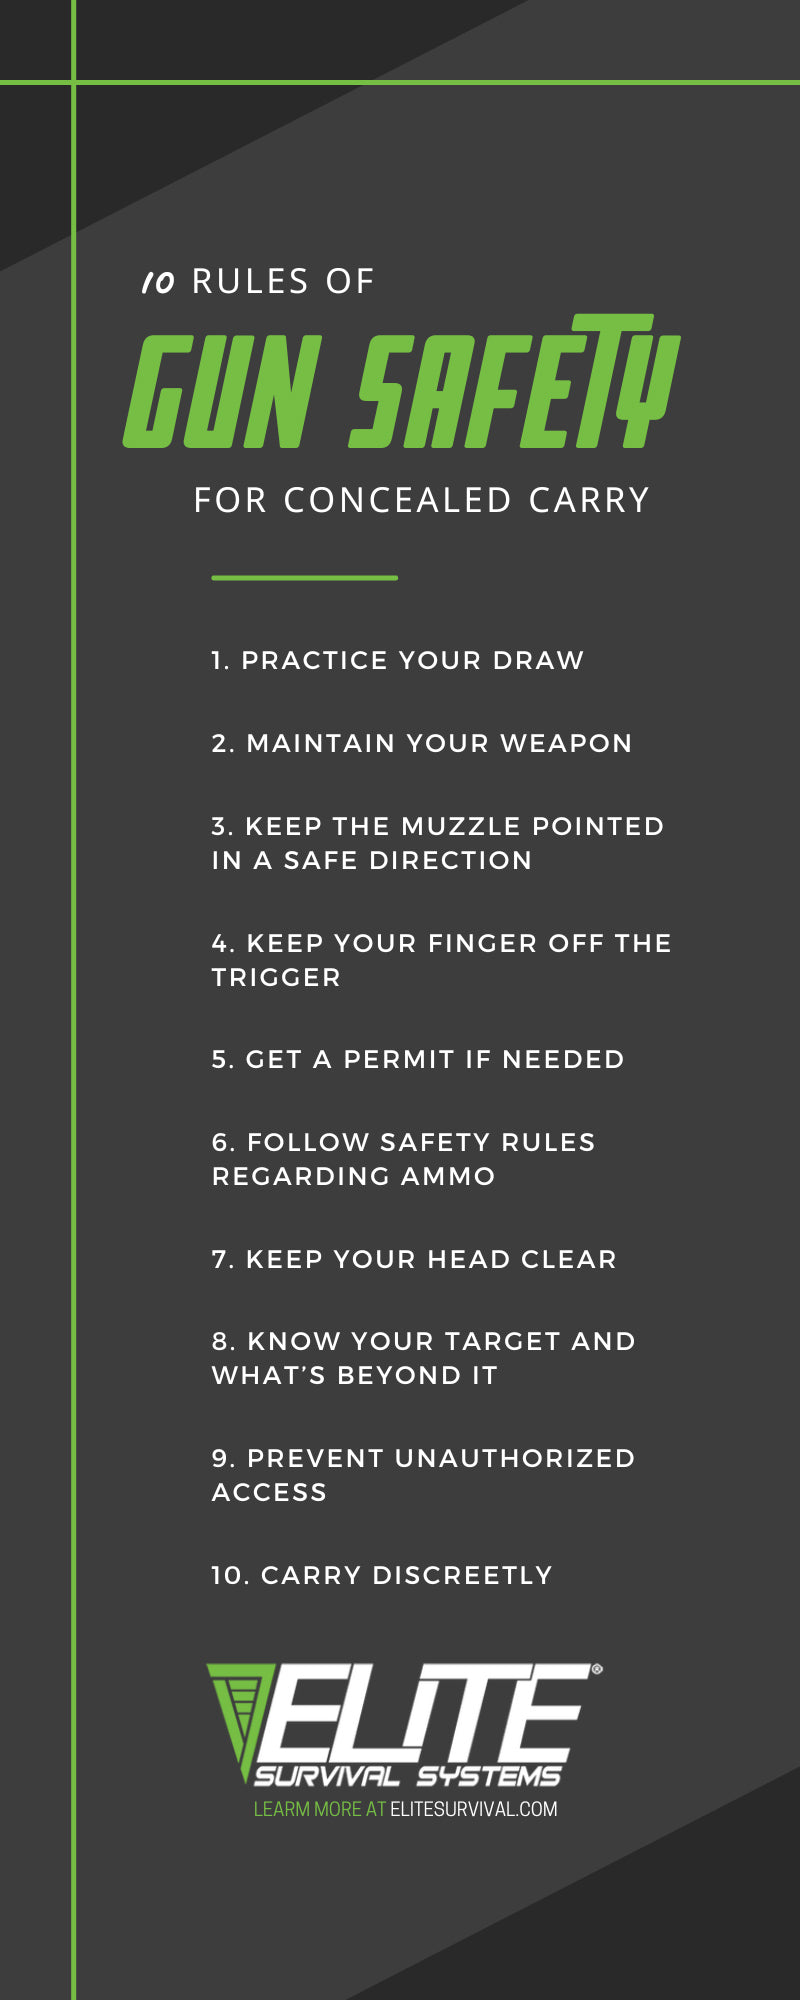 10 Rules of Gun Safety for Concealed Carry